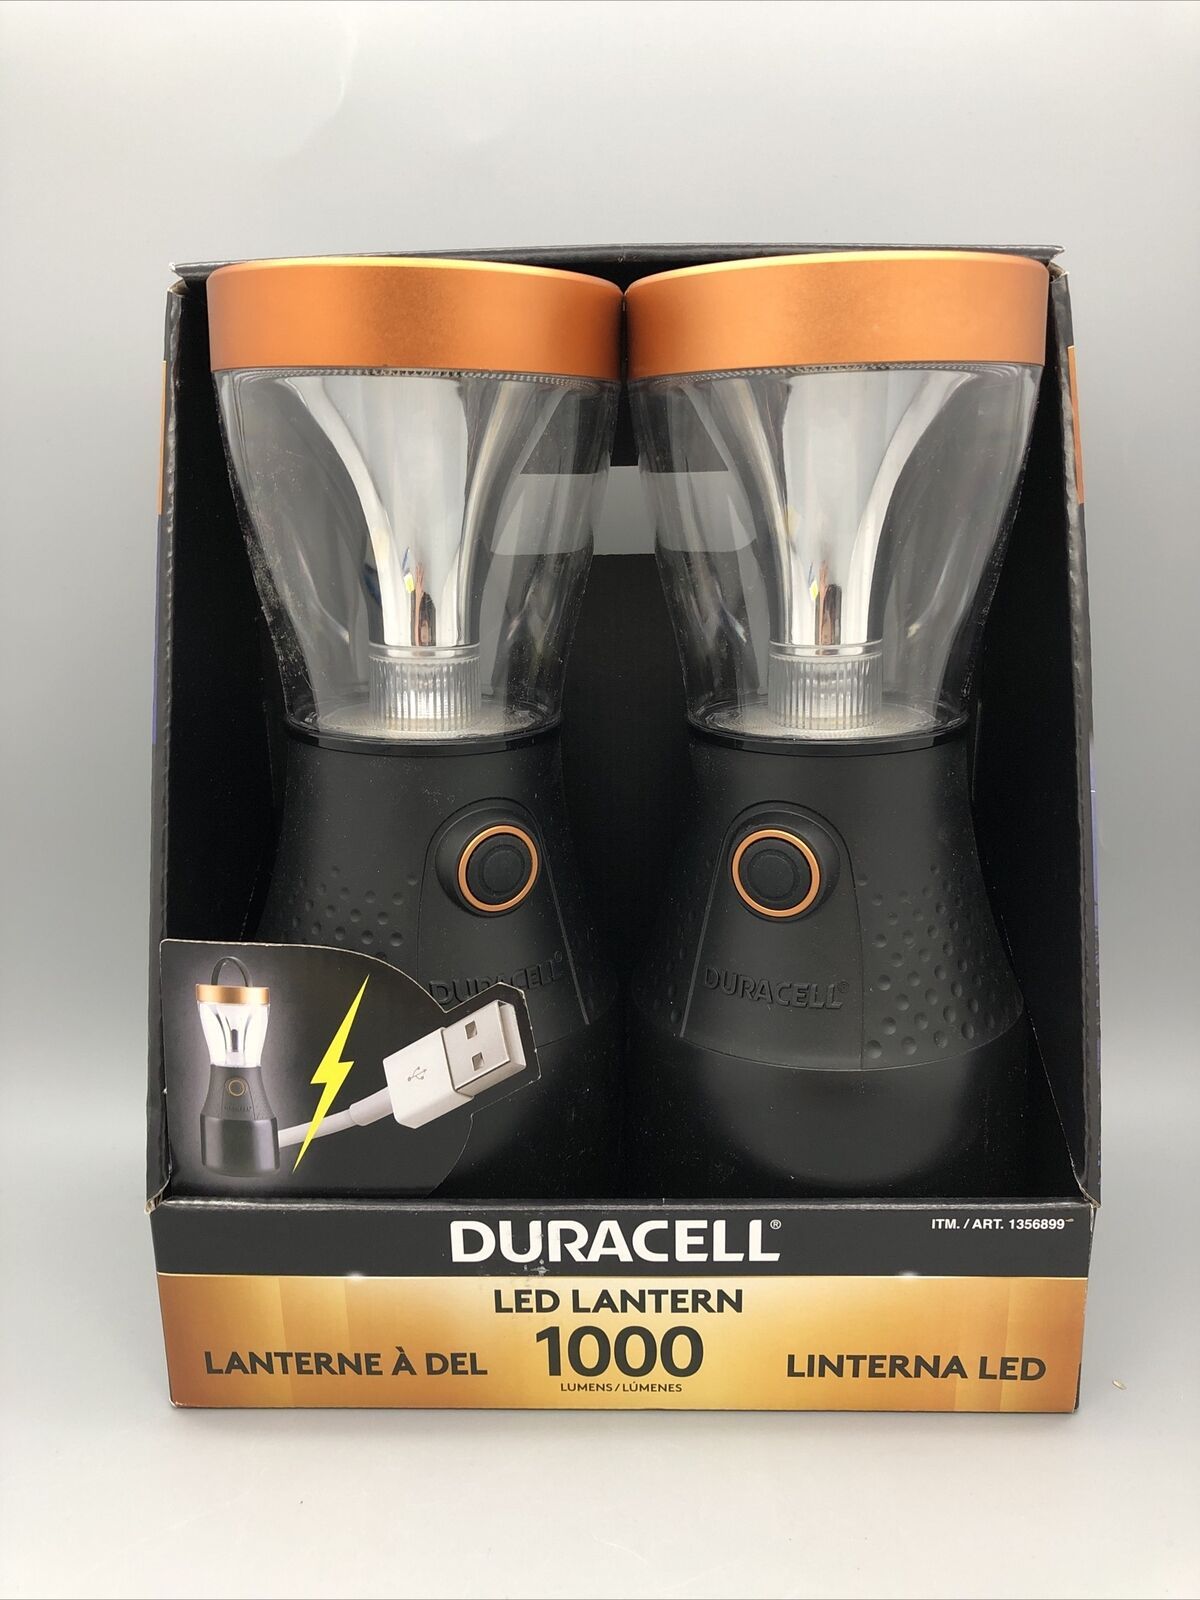 Duracell Led Lanterns 1000 Lumens with USB and 50 similar items